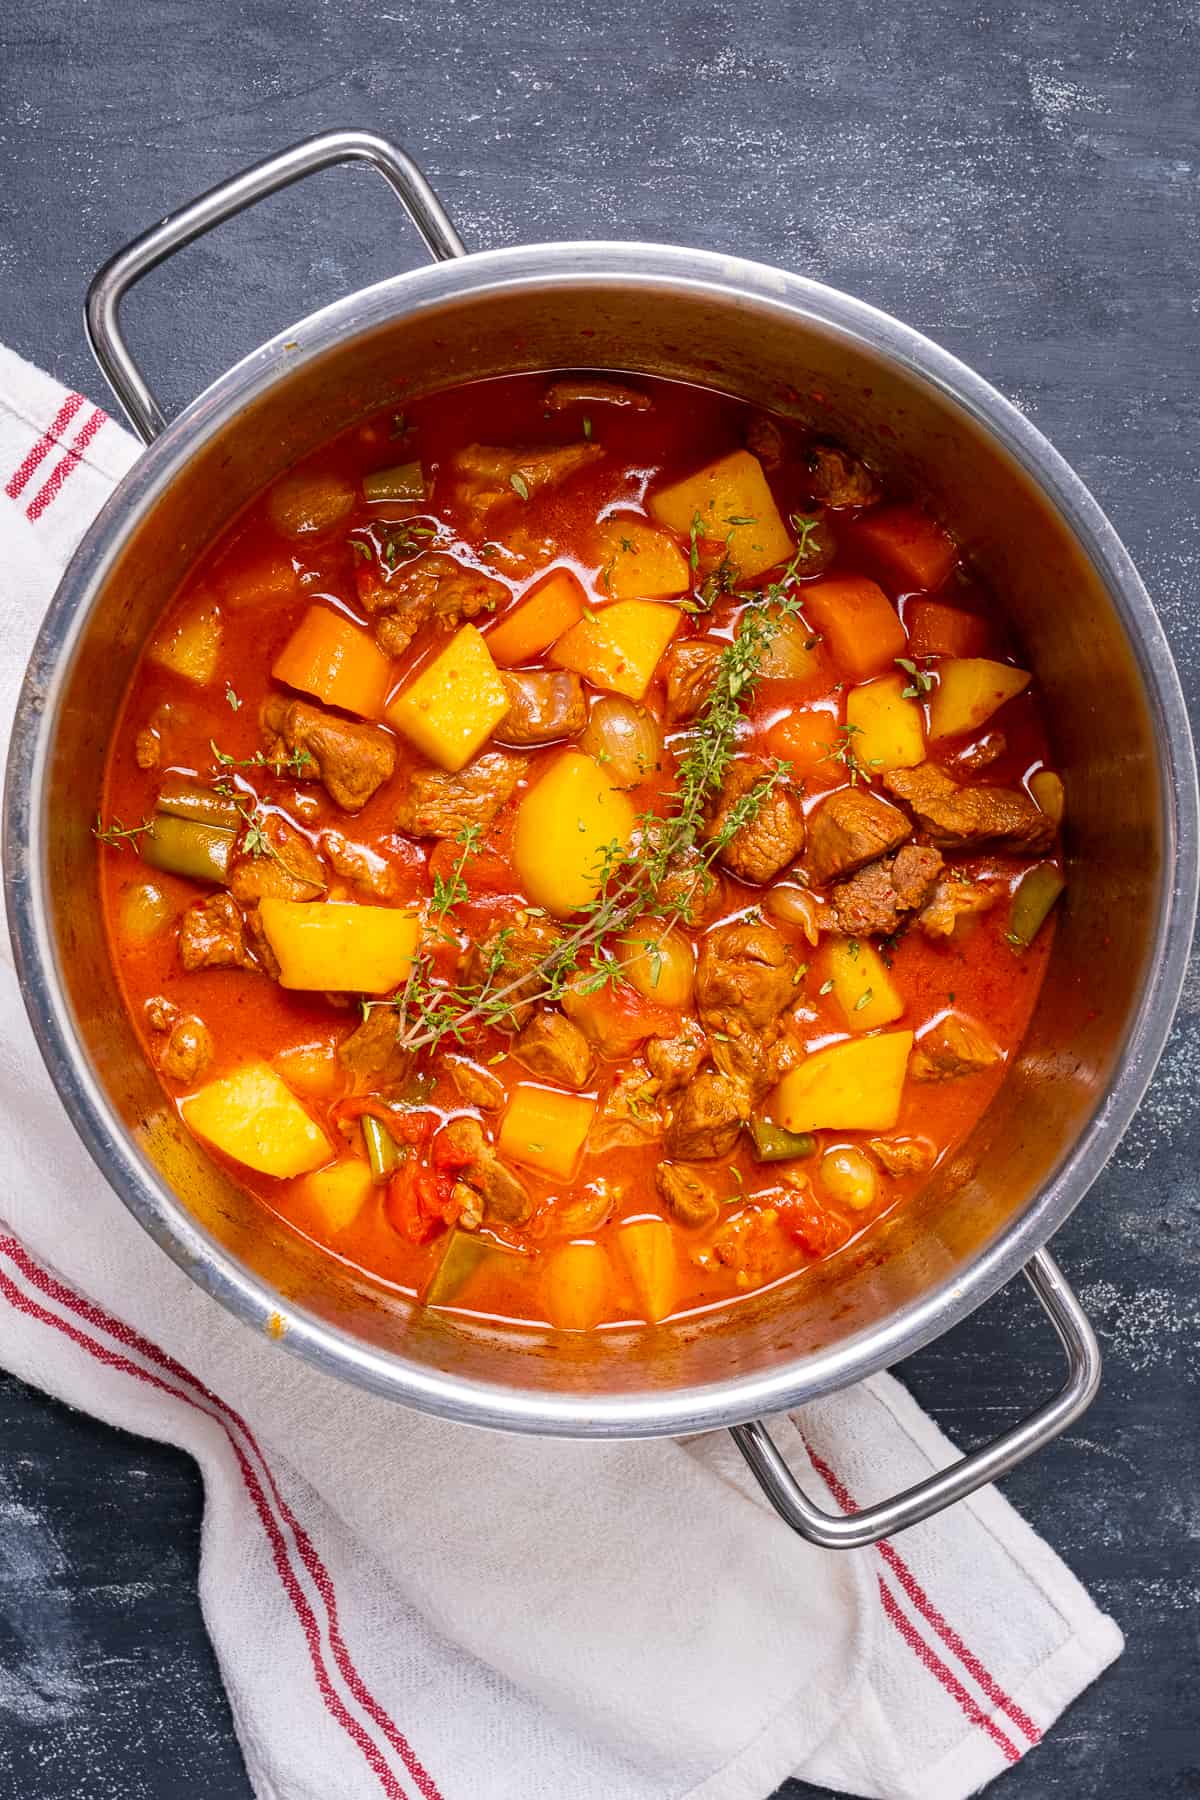 Lamb stew with potatoes and carrots in a pan.